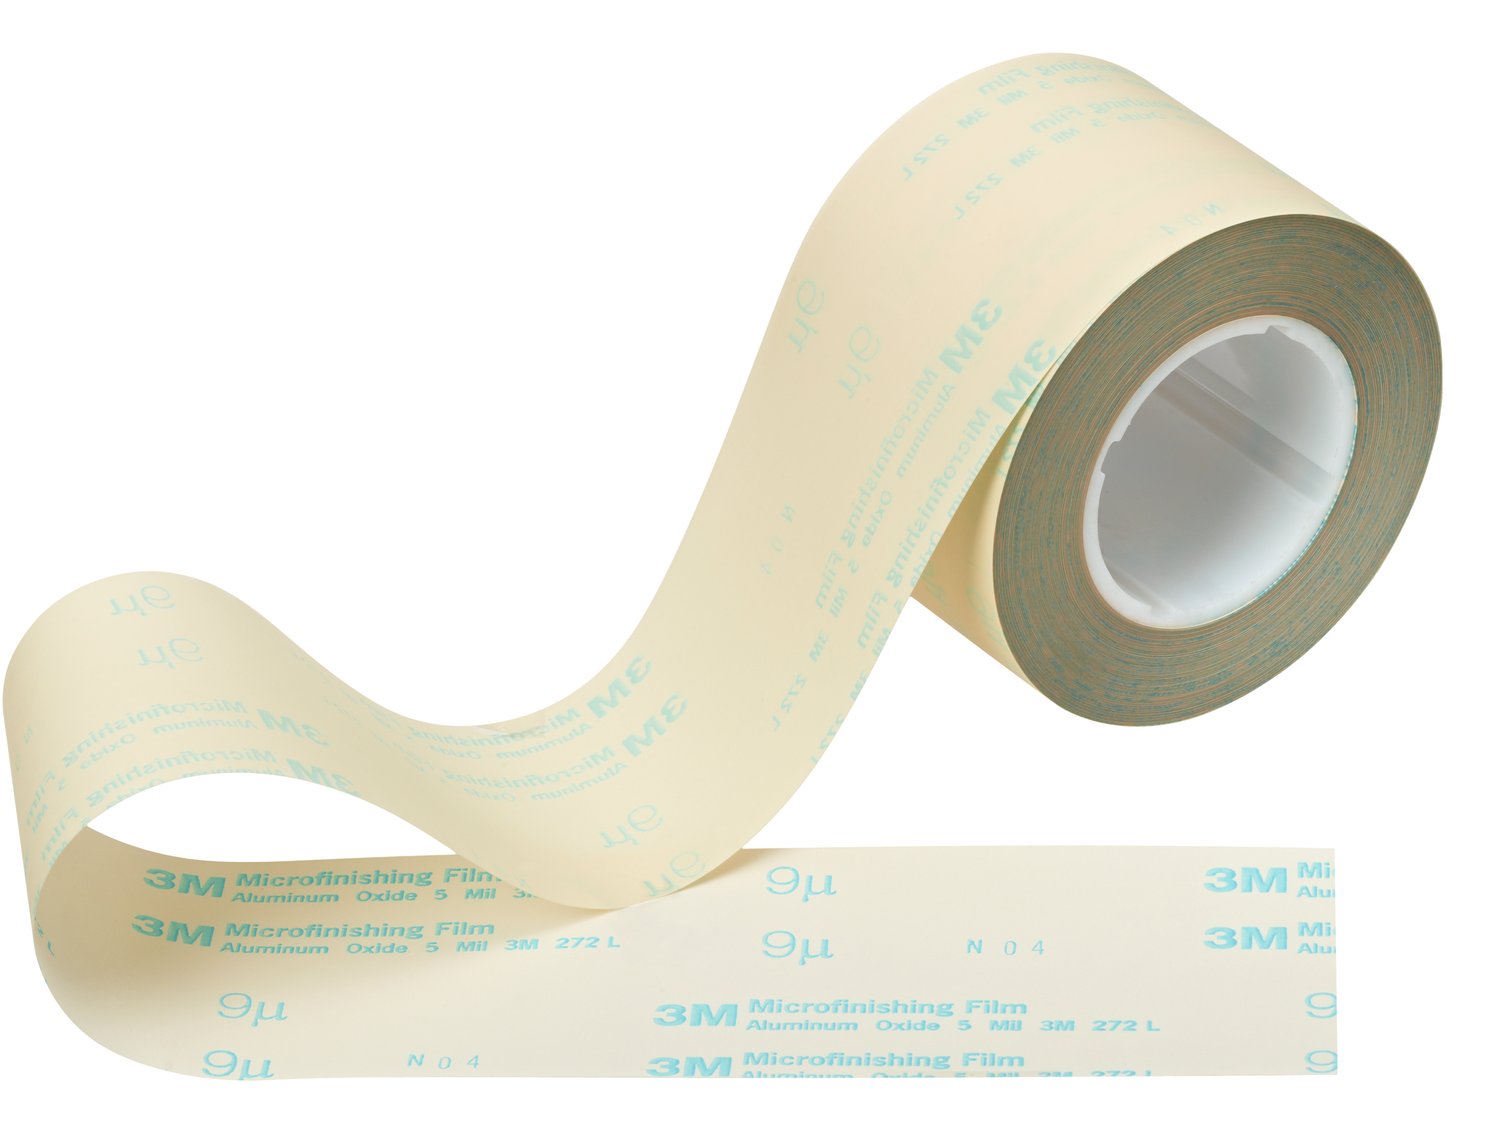 7010533522 - 3M Microfinishing Film Roll 272L, 60 Mic 5MIL, Type UK, 8 in x 150 ft x
3 in (203.2mmx45.75m), Keyed Core, ASO